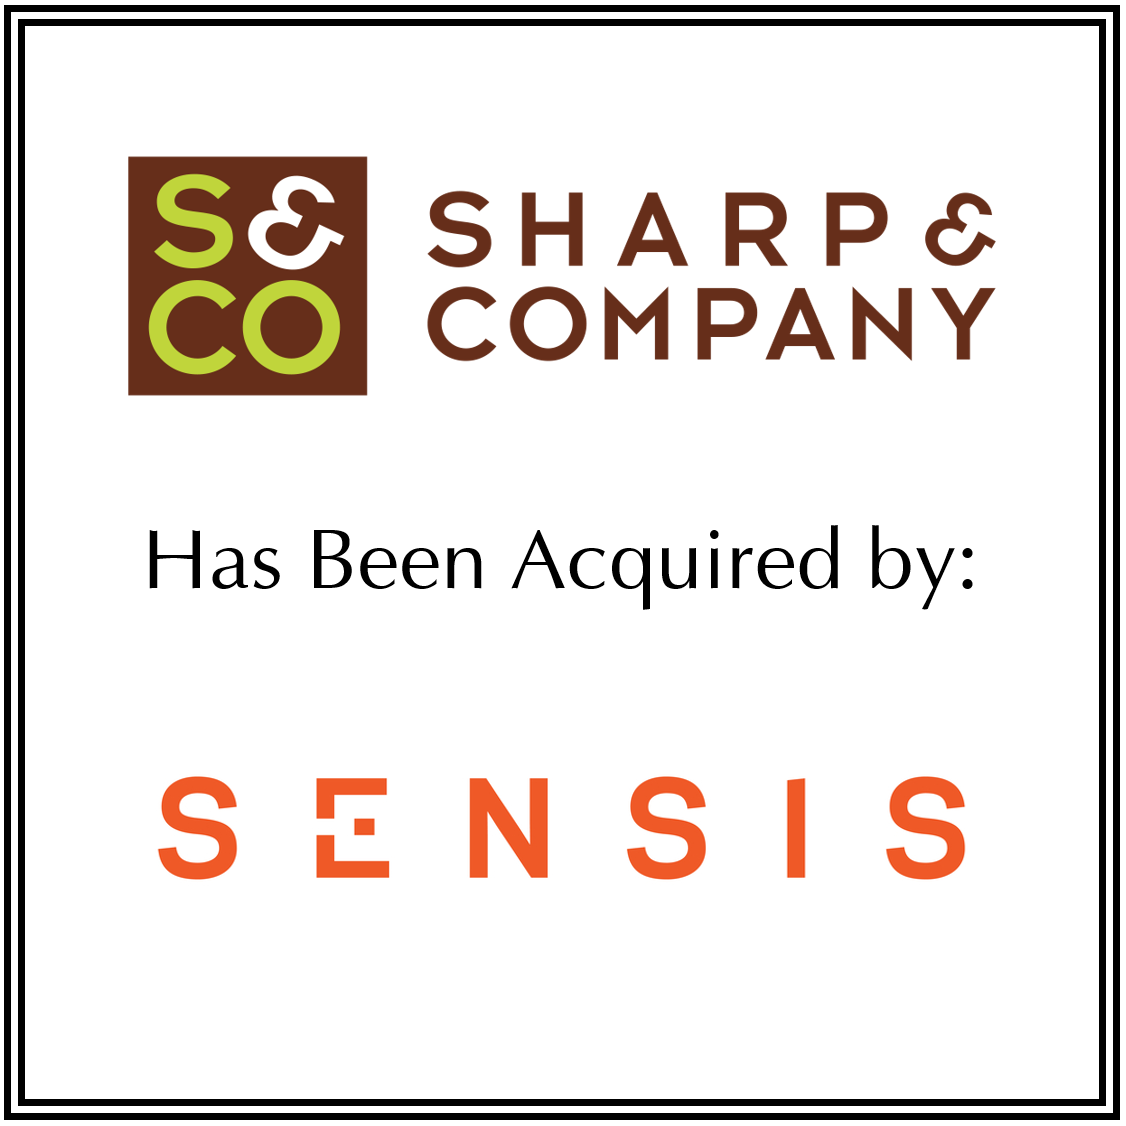 Sharp & Company Has Been Acquired by: Sensis 